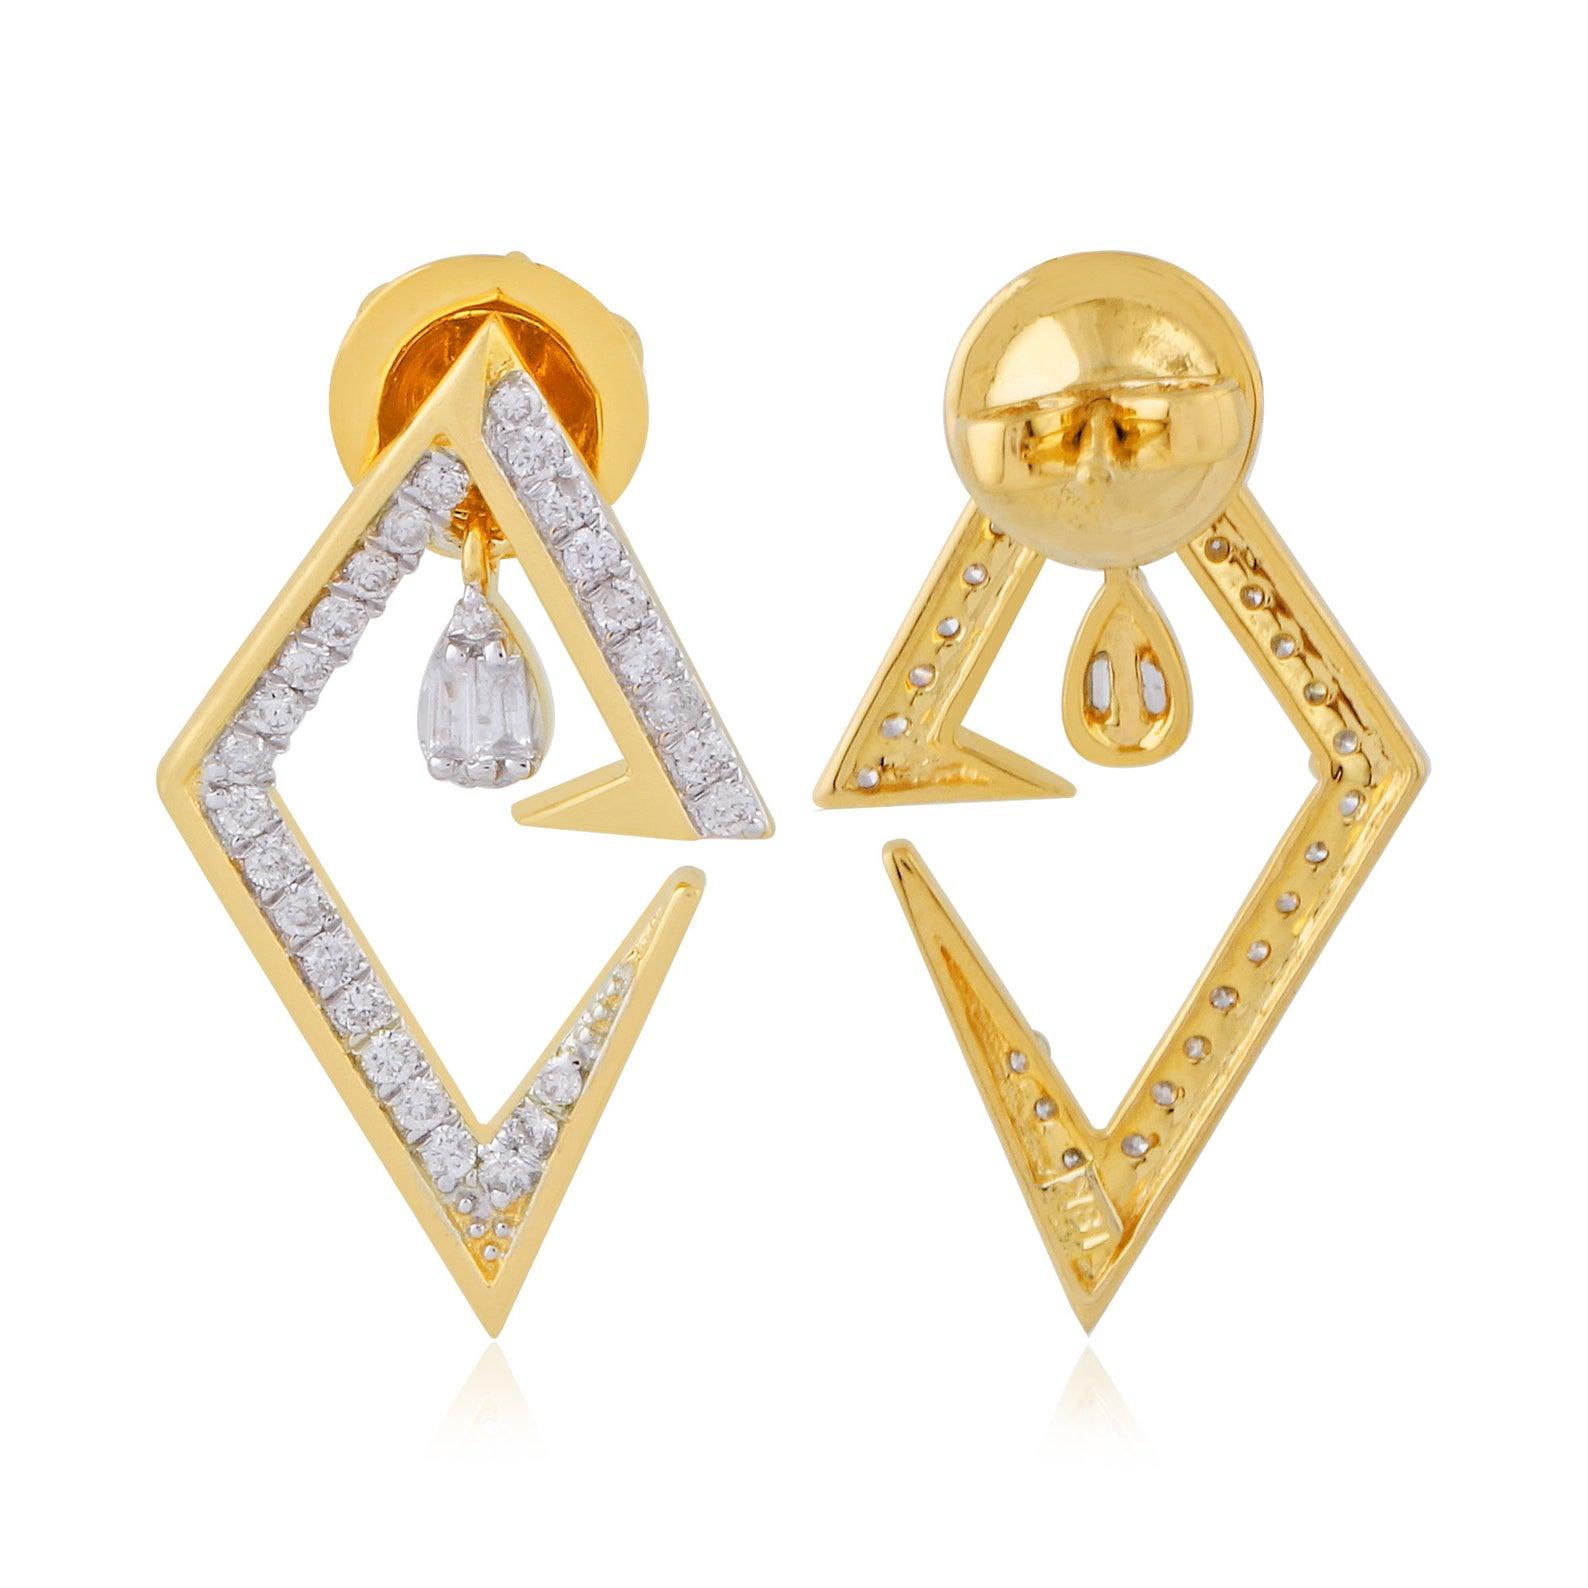 Cast from 14-karat gold, these beautiful stud earrings are hand set with .60 carats of diamonds. 

FOLLOW MEGHNA JEWELS storefront to view the latest collection & exclusive pieces. Meghna Jewels is proudly rated as a Top Seller on 1stdibs with 5